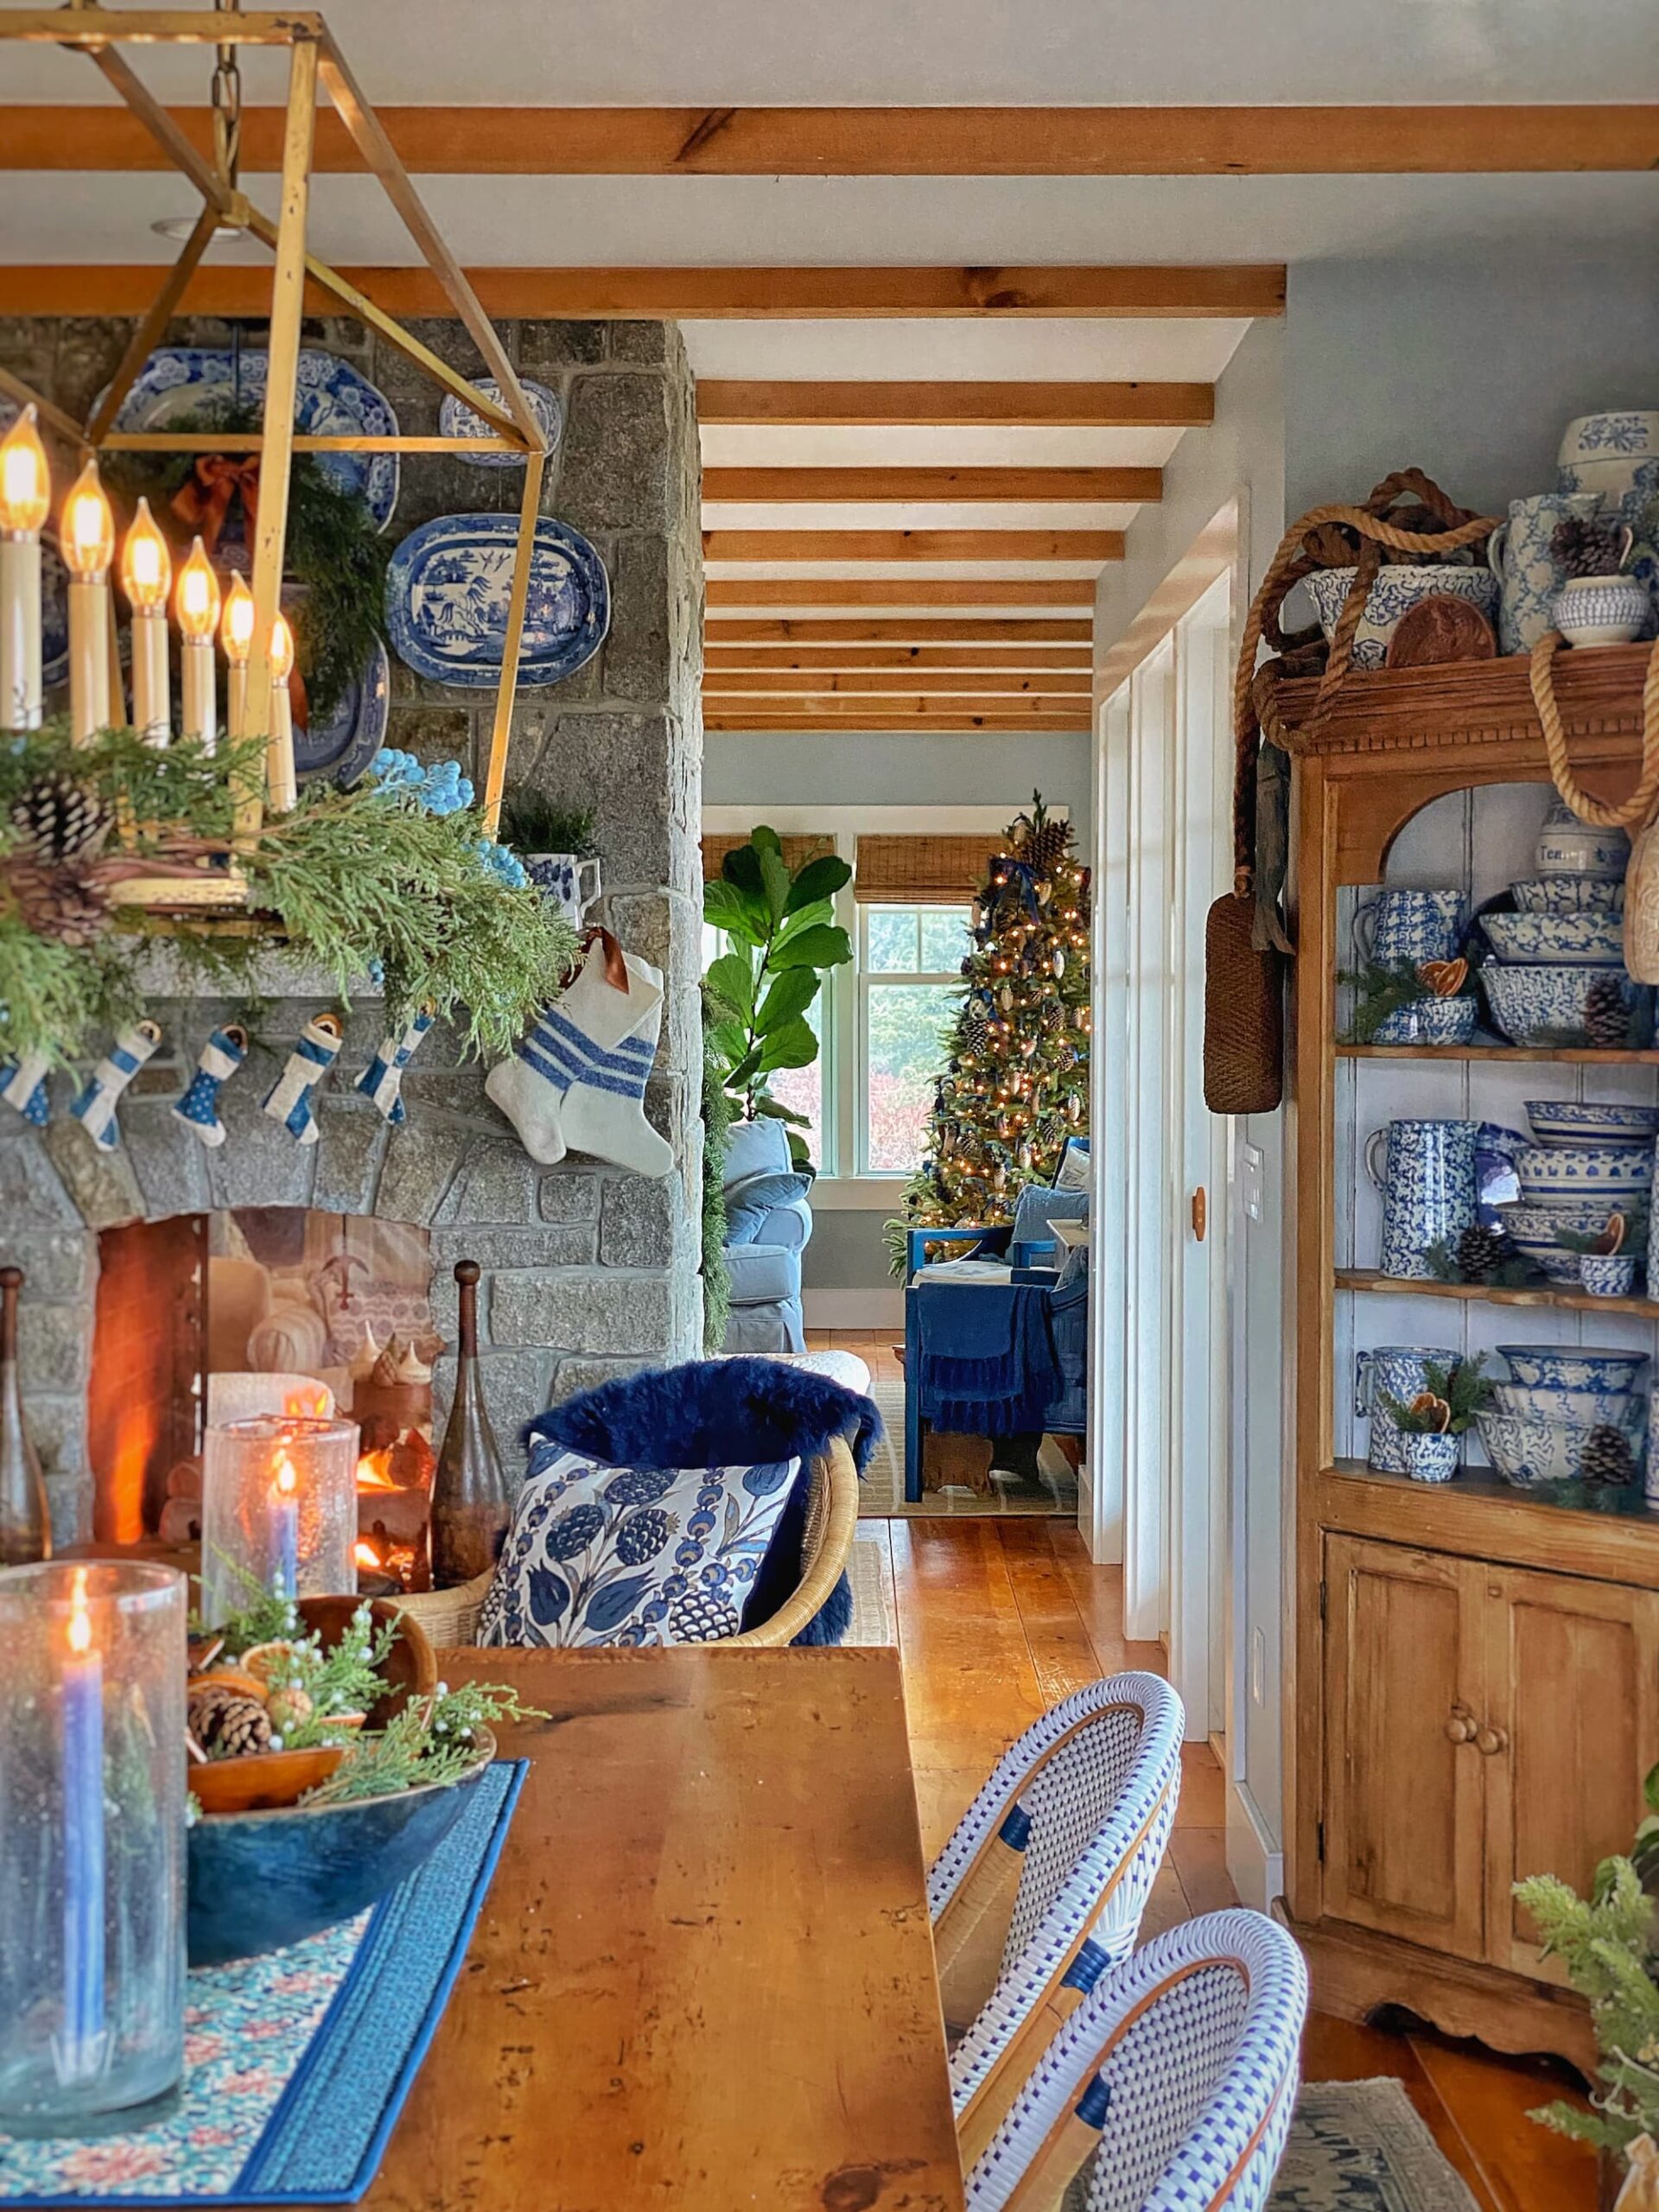 https://mollyinmaine.com/wp-content/uploads/2022/12/A-Cozy-Cottage-Christmas-on-the-Maine-Coast-10-scaled.jpg